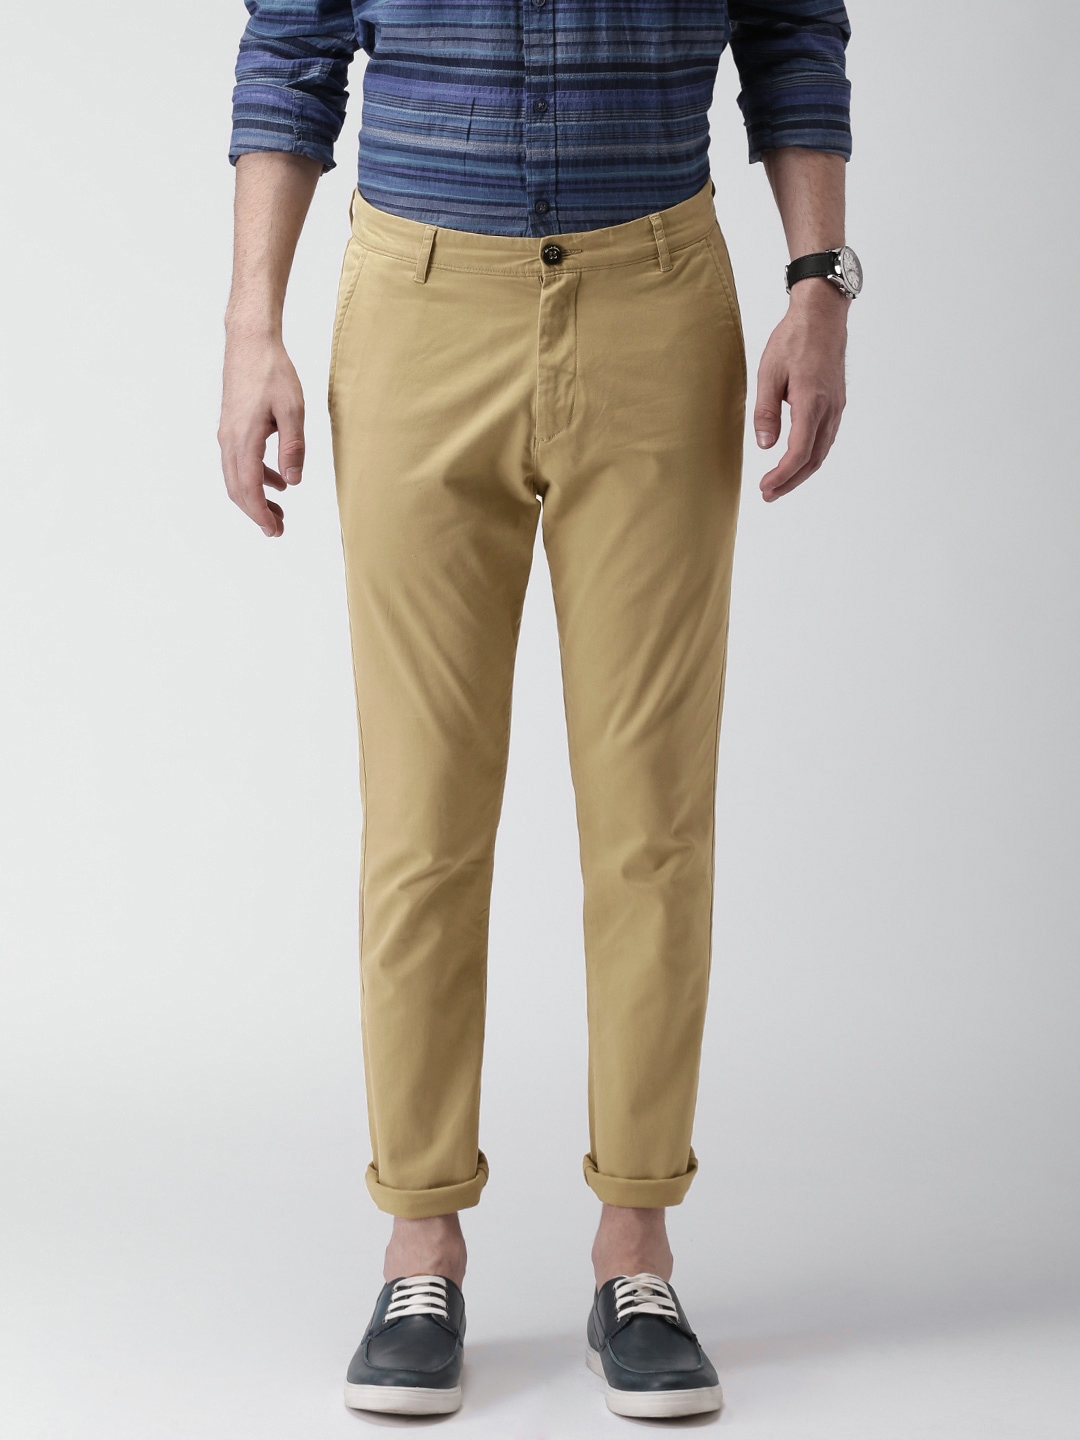 Buy Mast  Harbour Khaki Slim Differential Length Flat Front Casual Trousers   Trousers for Men 1368644  Myntra